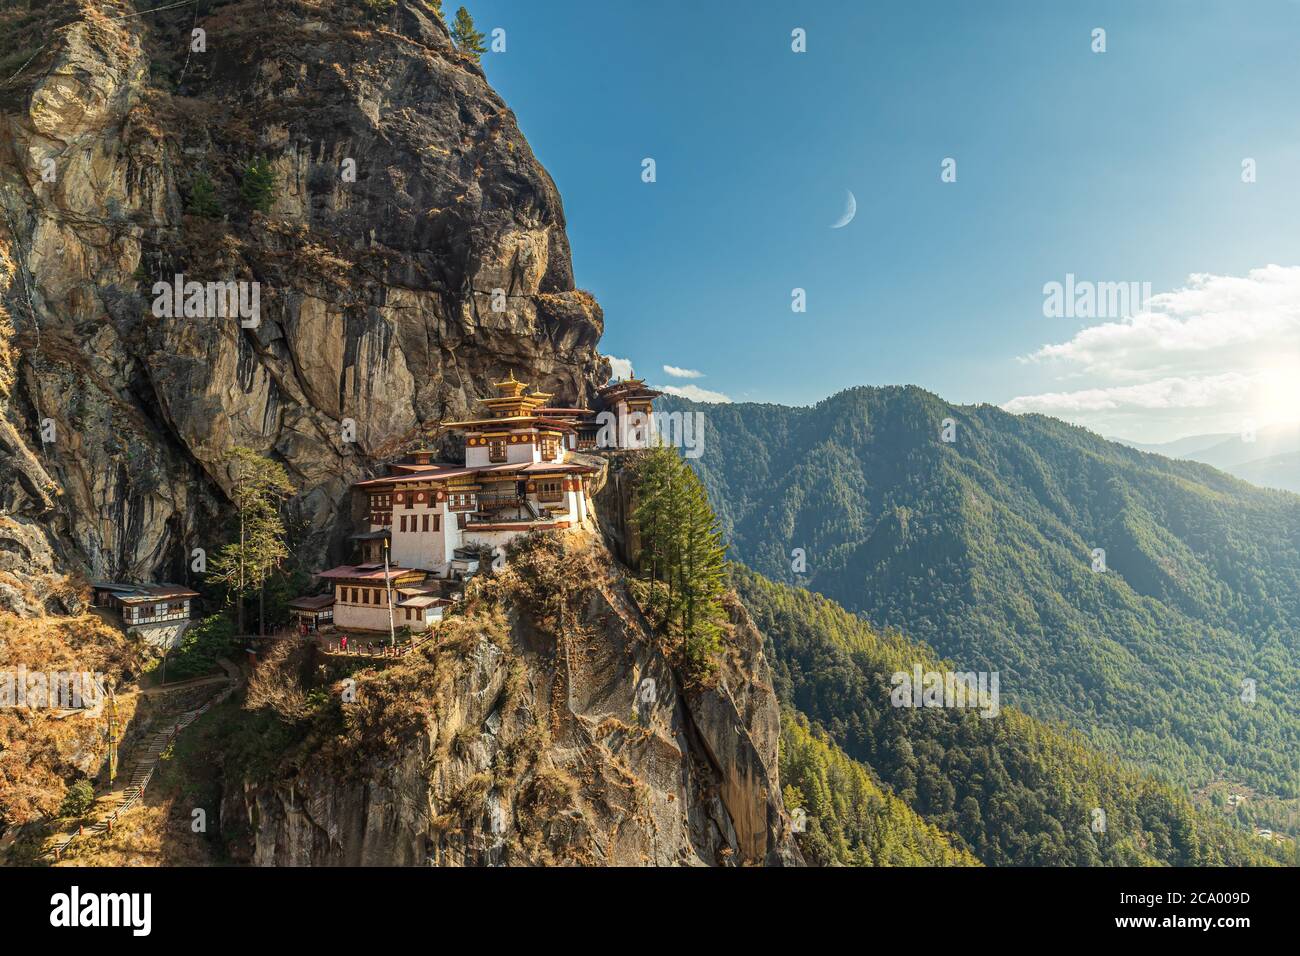 A view of the cliffside Tiger's Nest Monastery in Paro, Bhutan Stock Photo